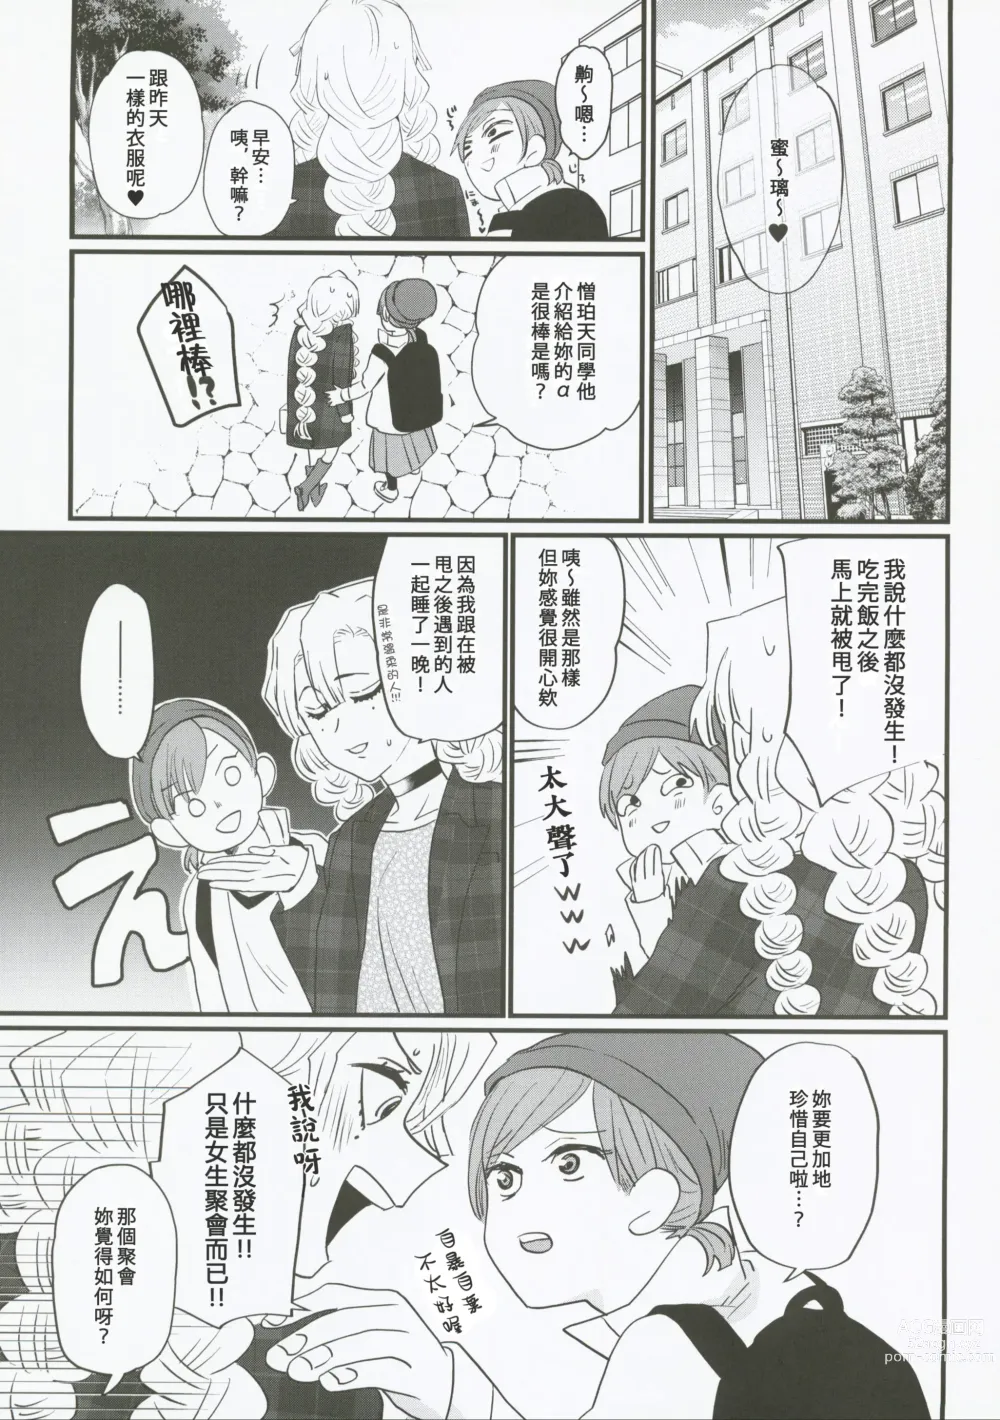 Page 13 of doujinshi 屬於妳的Omega